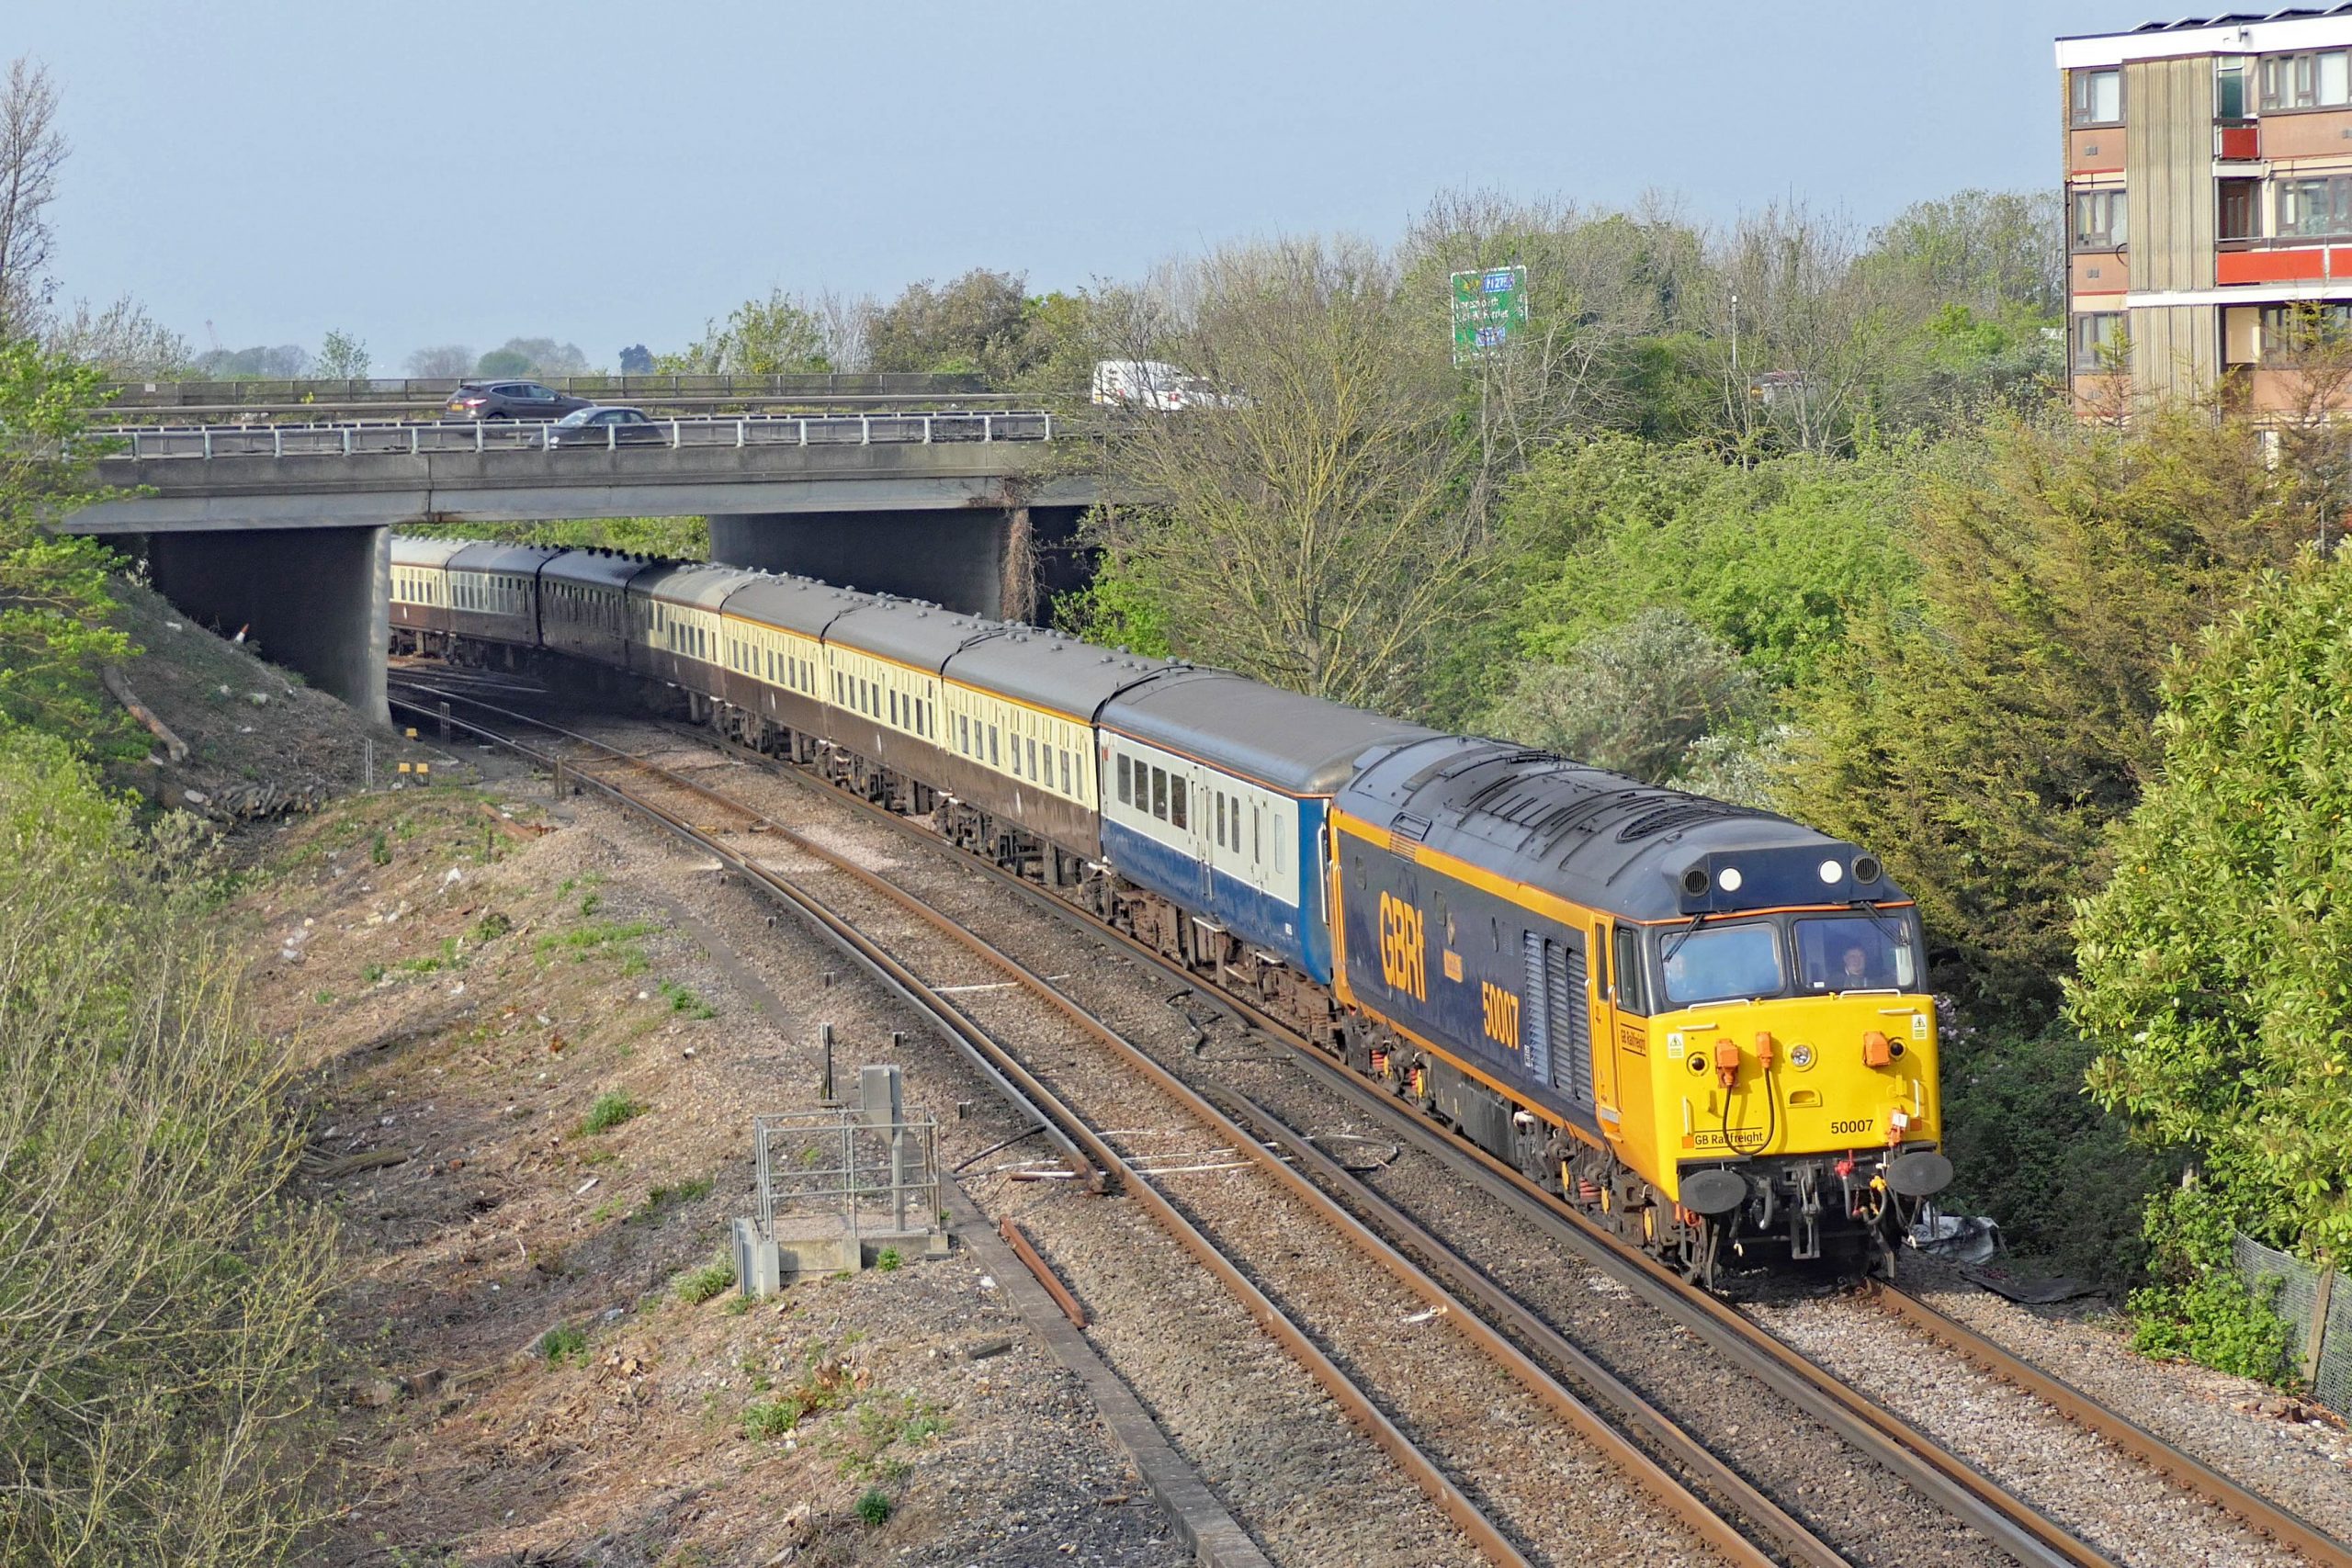 Passing over Portcreek Junction Class 50 007 heads the 08:11 Portsmouth & Southsea to Bognor Regis leg of 'The Great Britain' Saturday 23 April 2022.  Image Credit: Roger Sandford